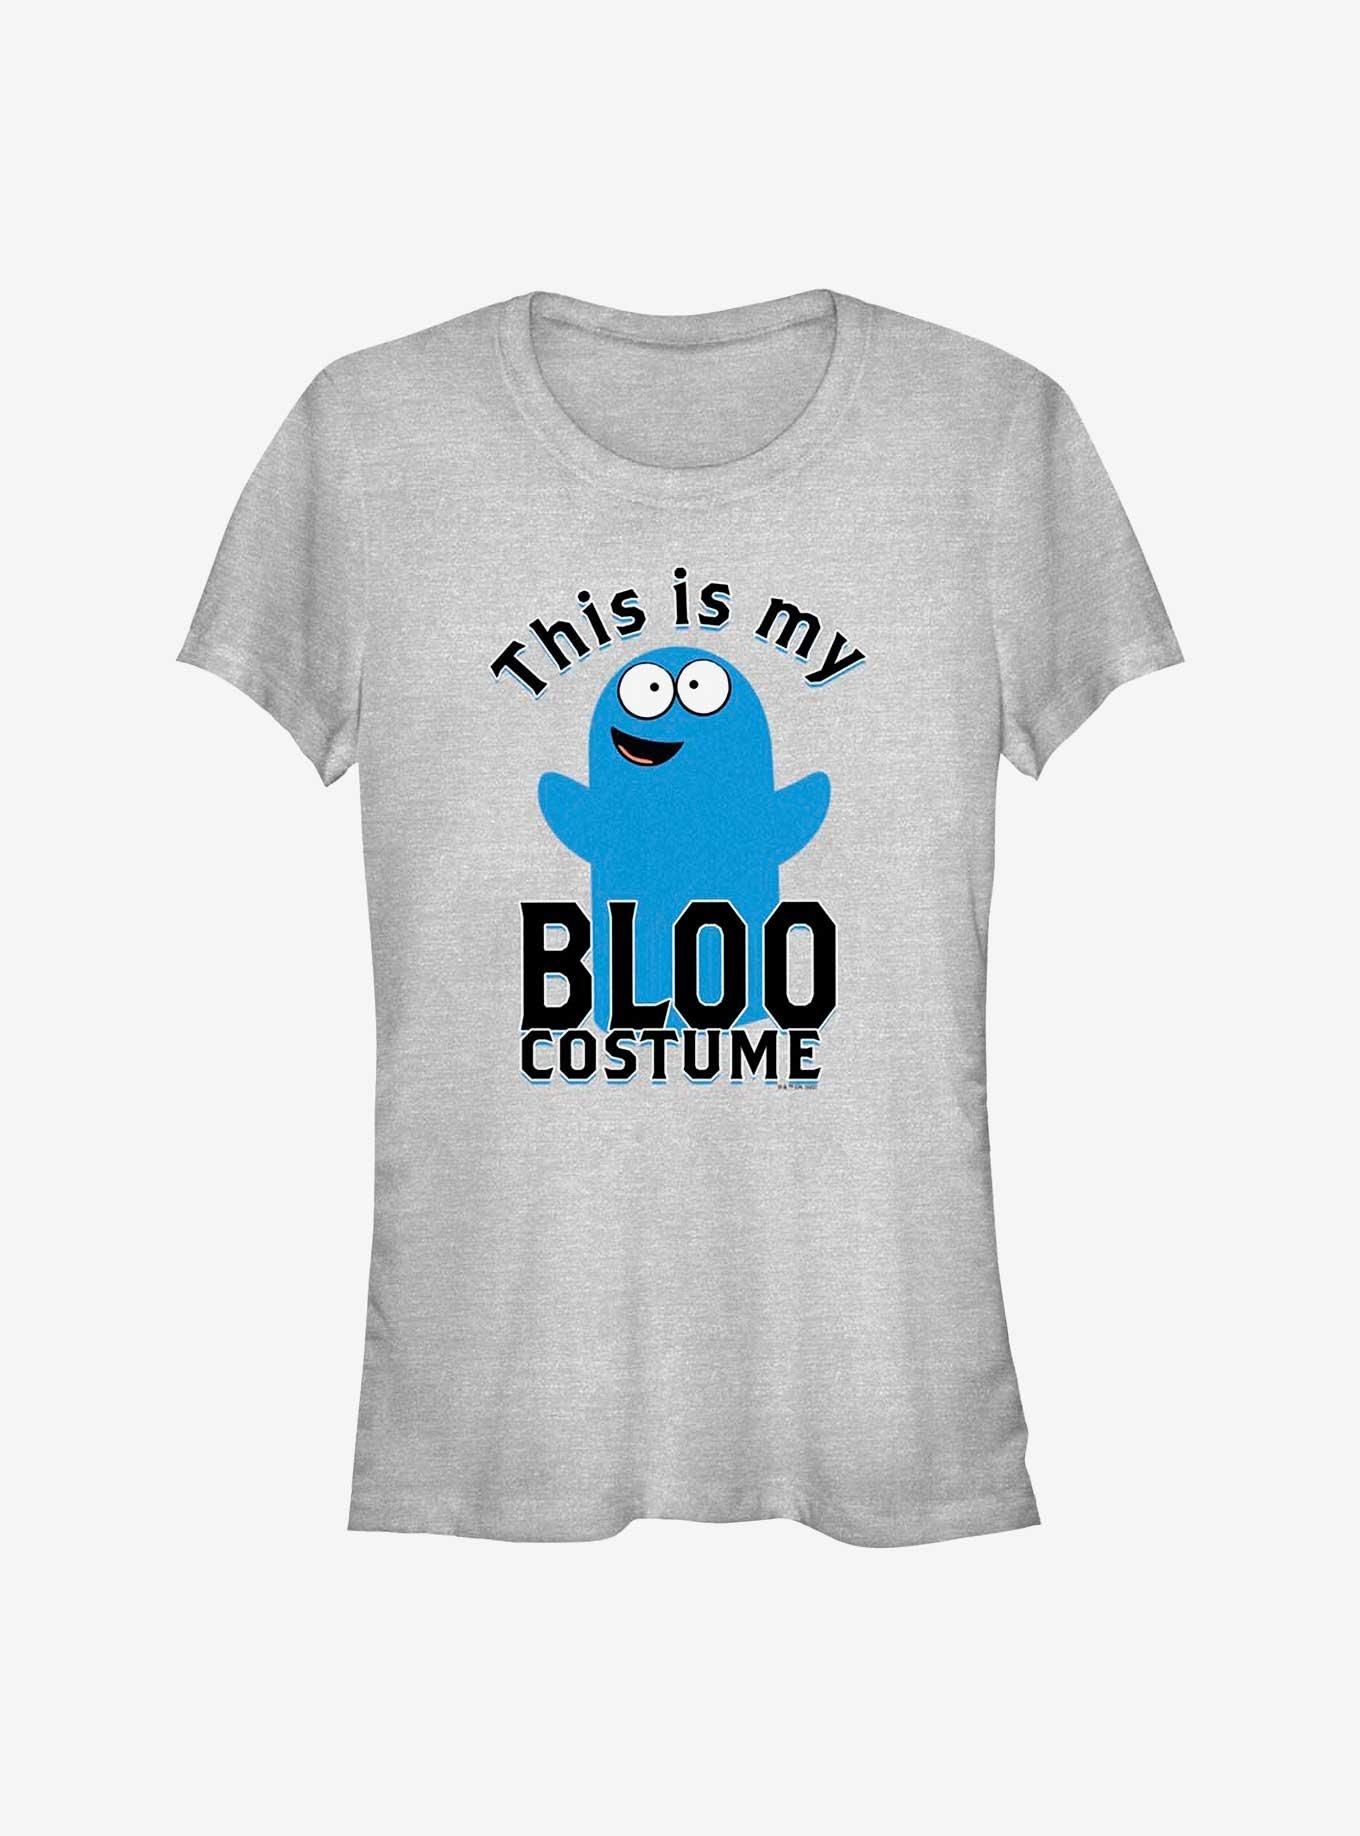 Cartoon Network Foster's Home for Imaginary Friends My Bloo Costume Girls T-Shirt